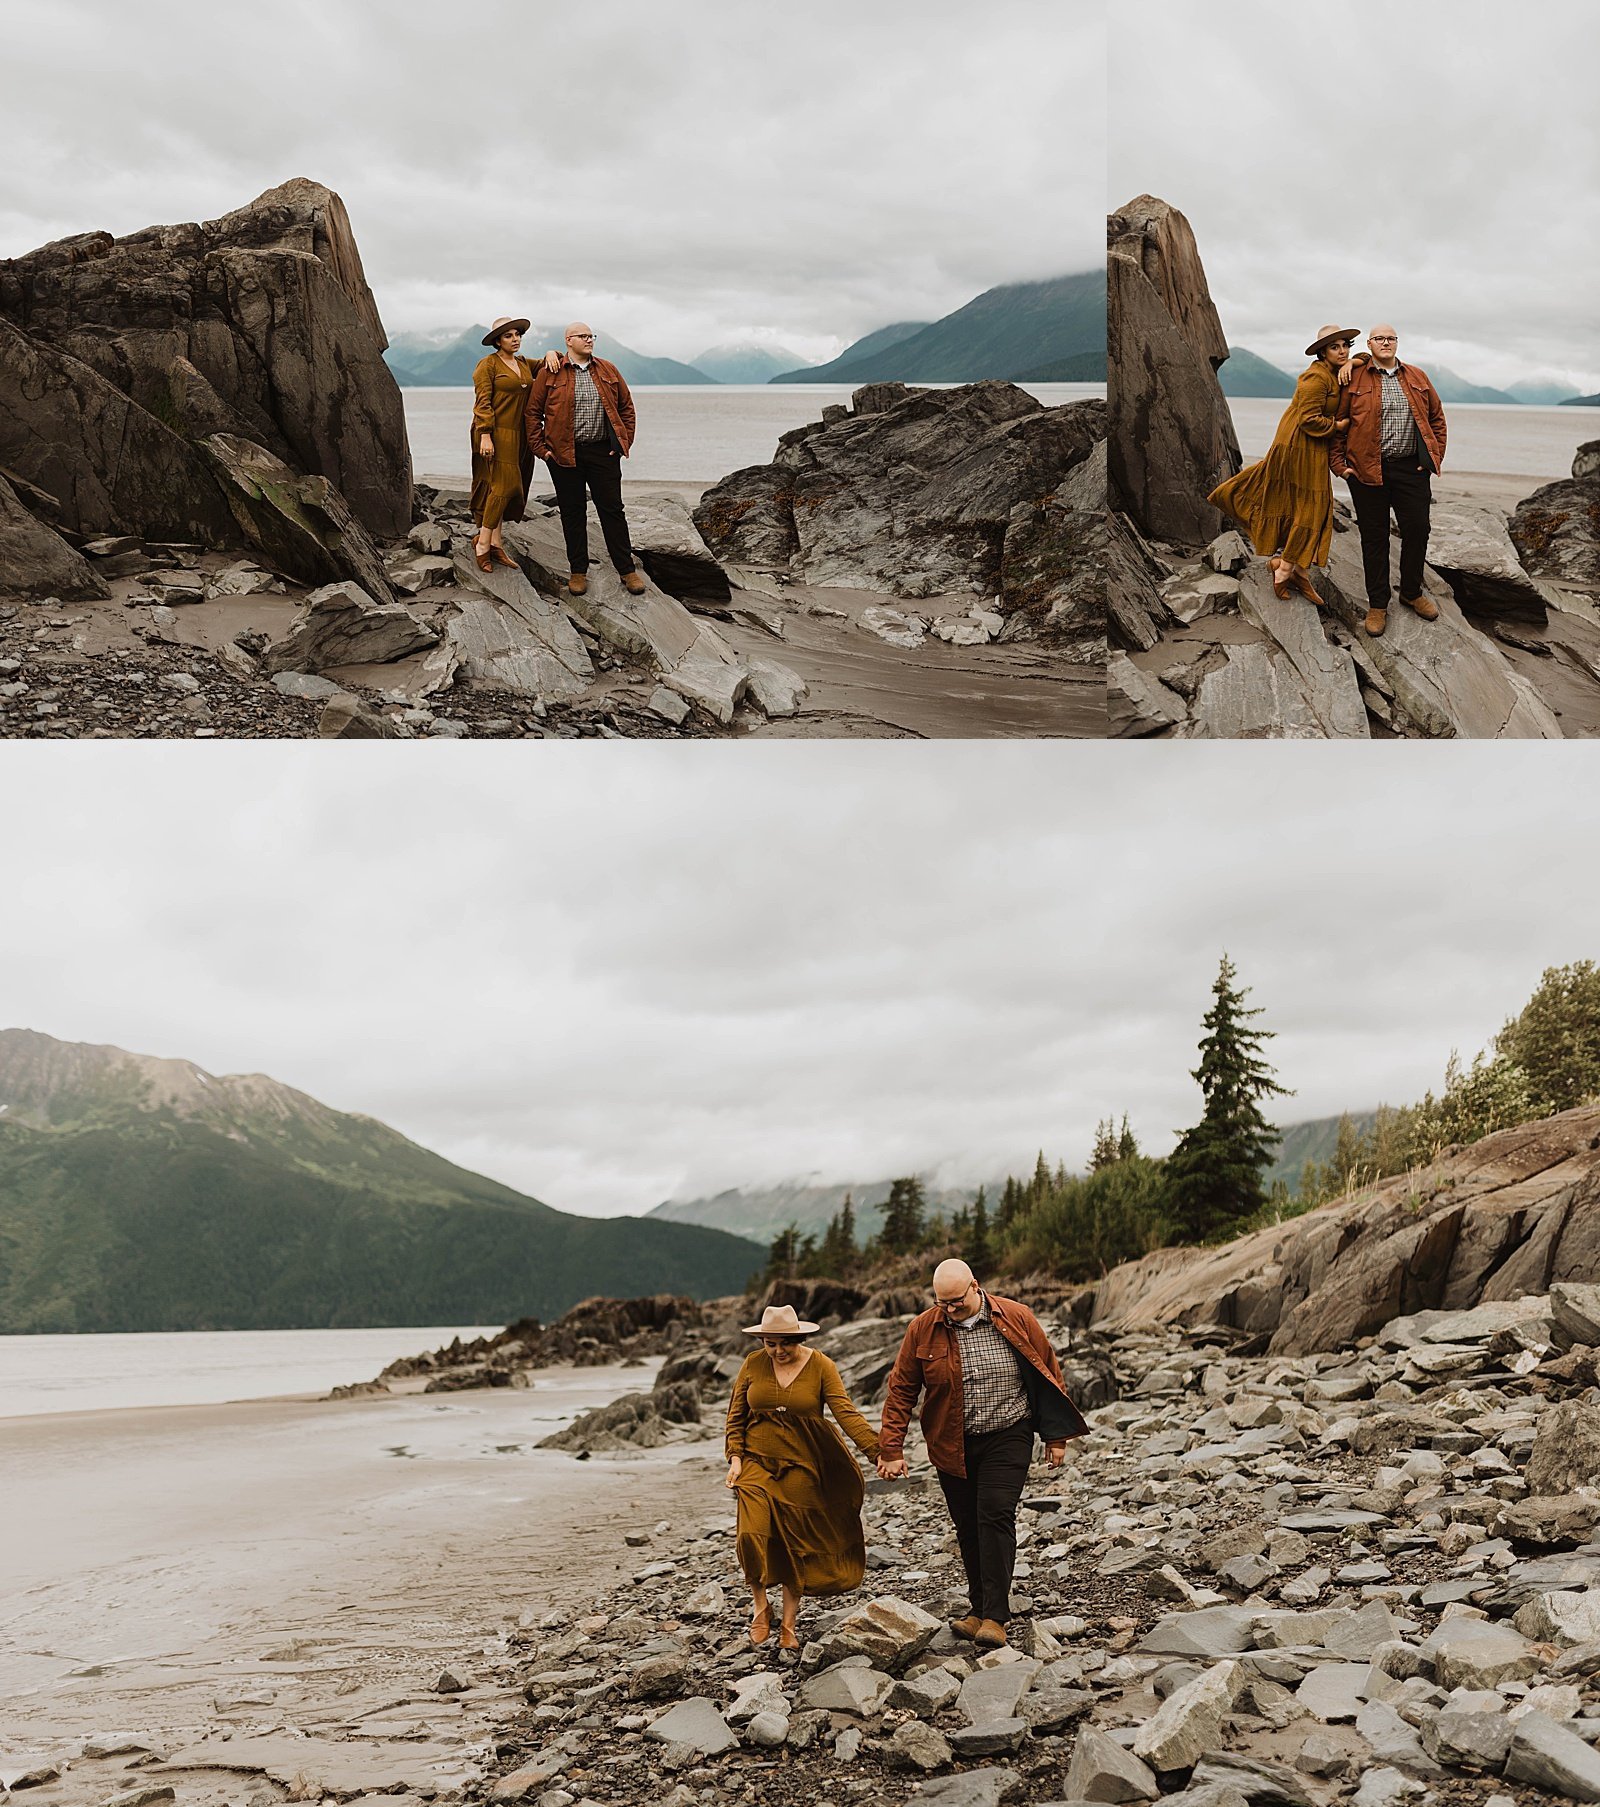  Couple walking along rocky beach in Alaska for their romantic anniversary session.  